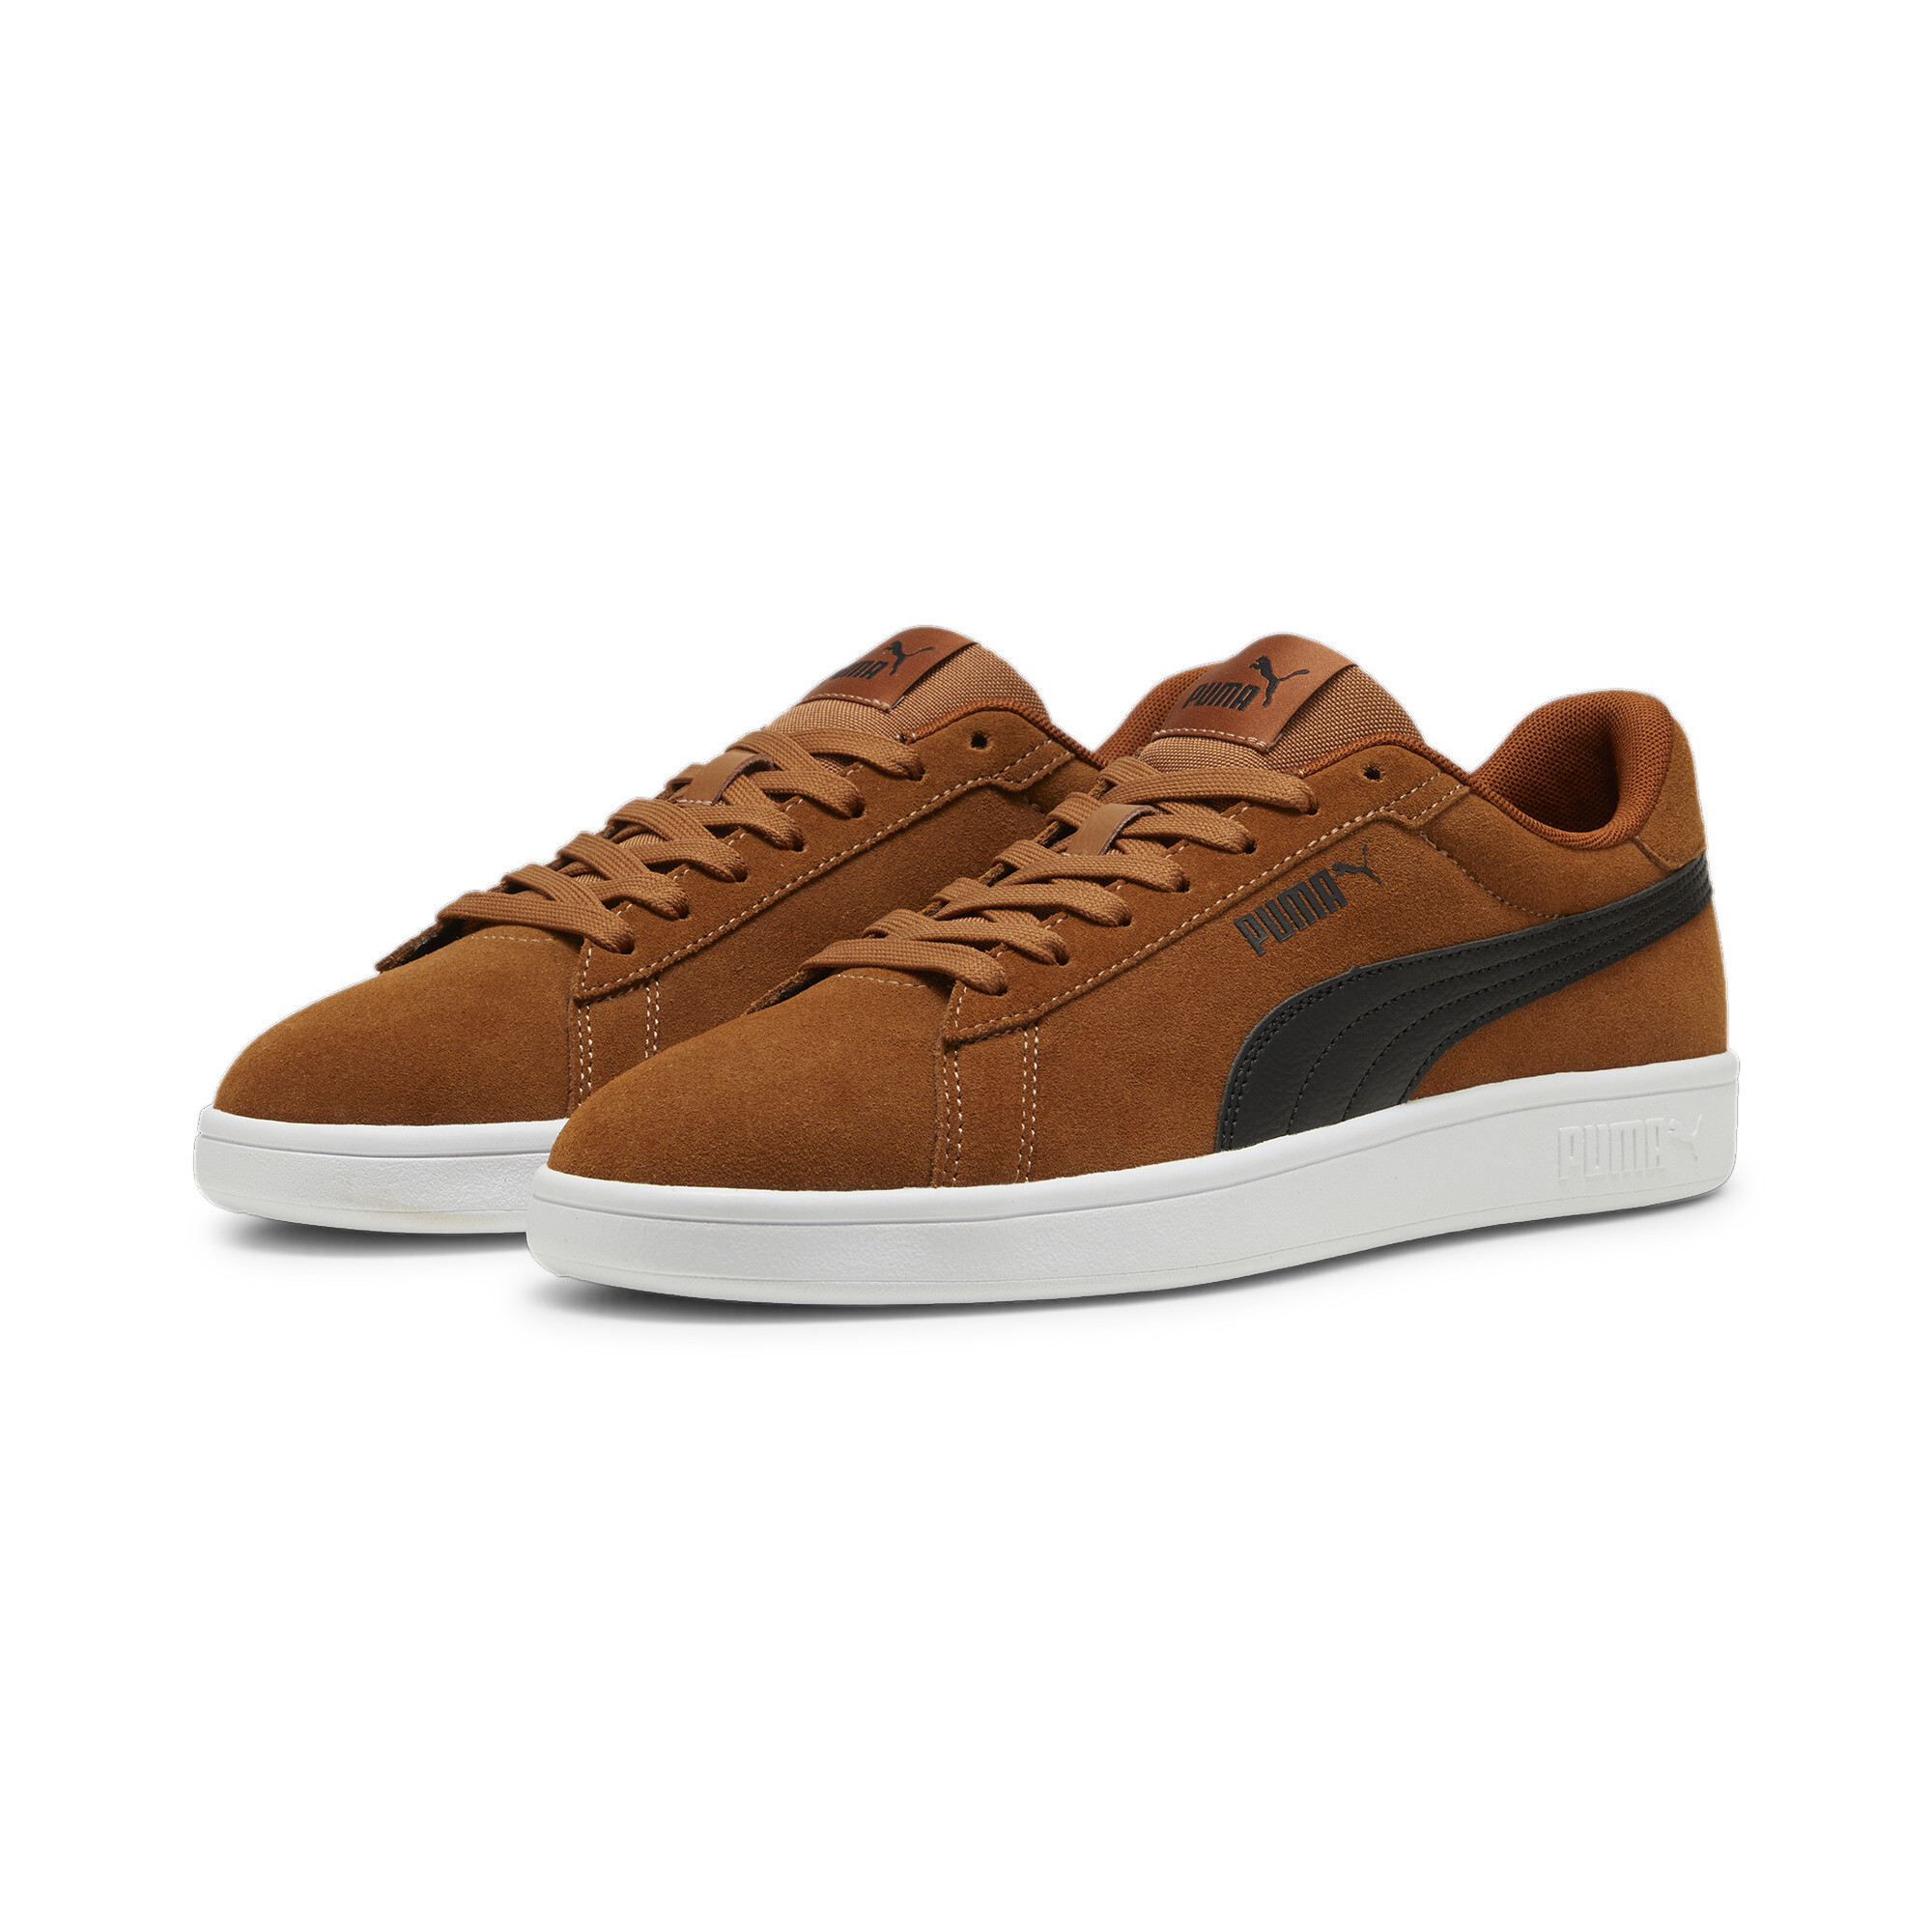 Puma Smash 3.0 Sneakers, Brown, Size 35.5, Shoes